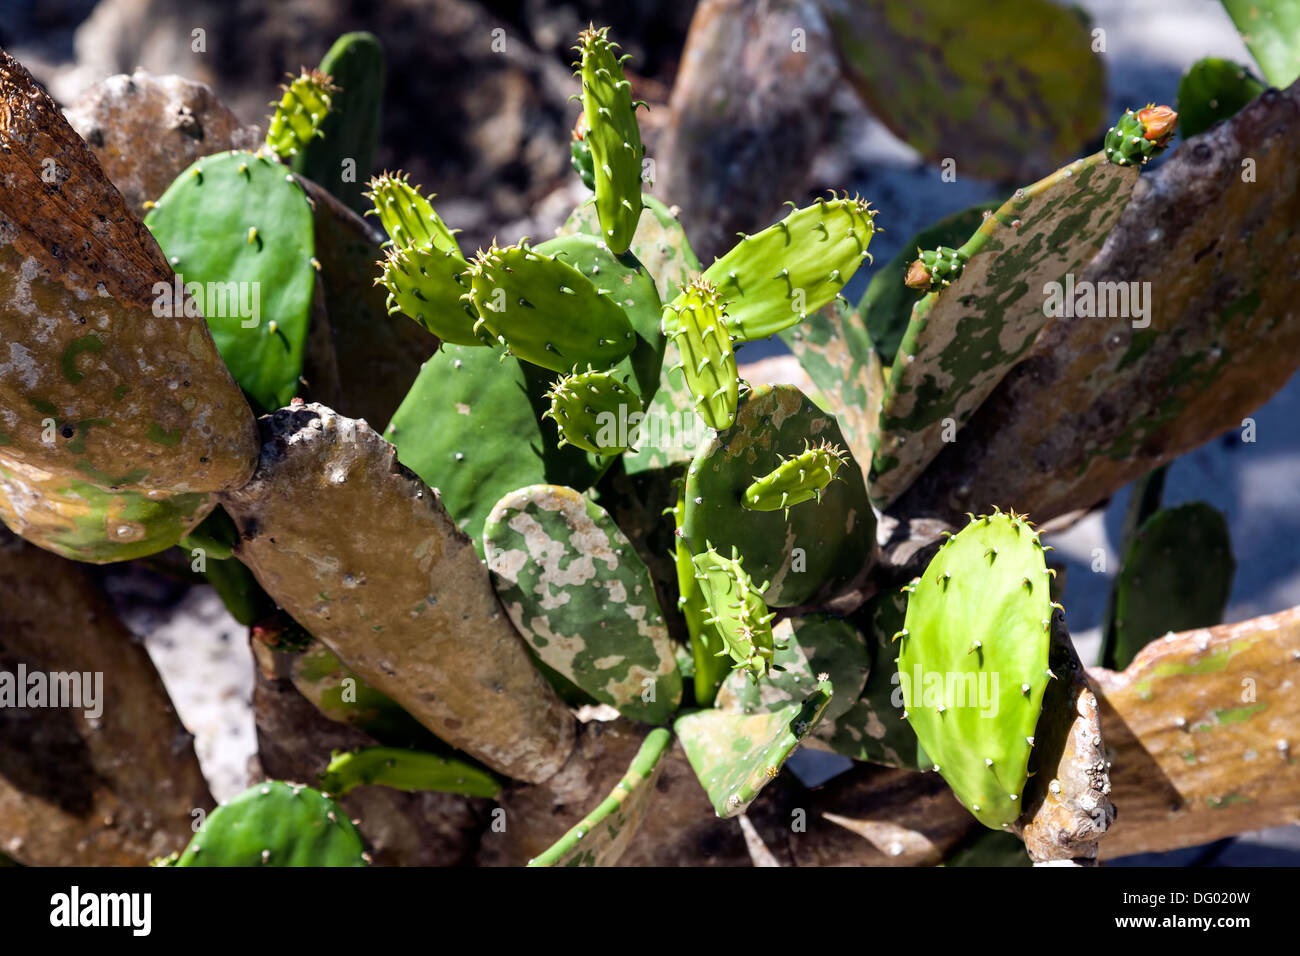 Cactus Leaves or nopales of a flat leaf cactus called Nopal. Stock Photo